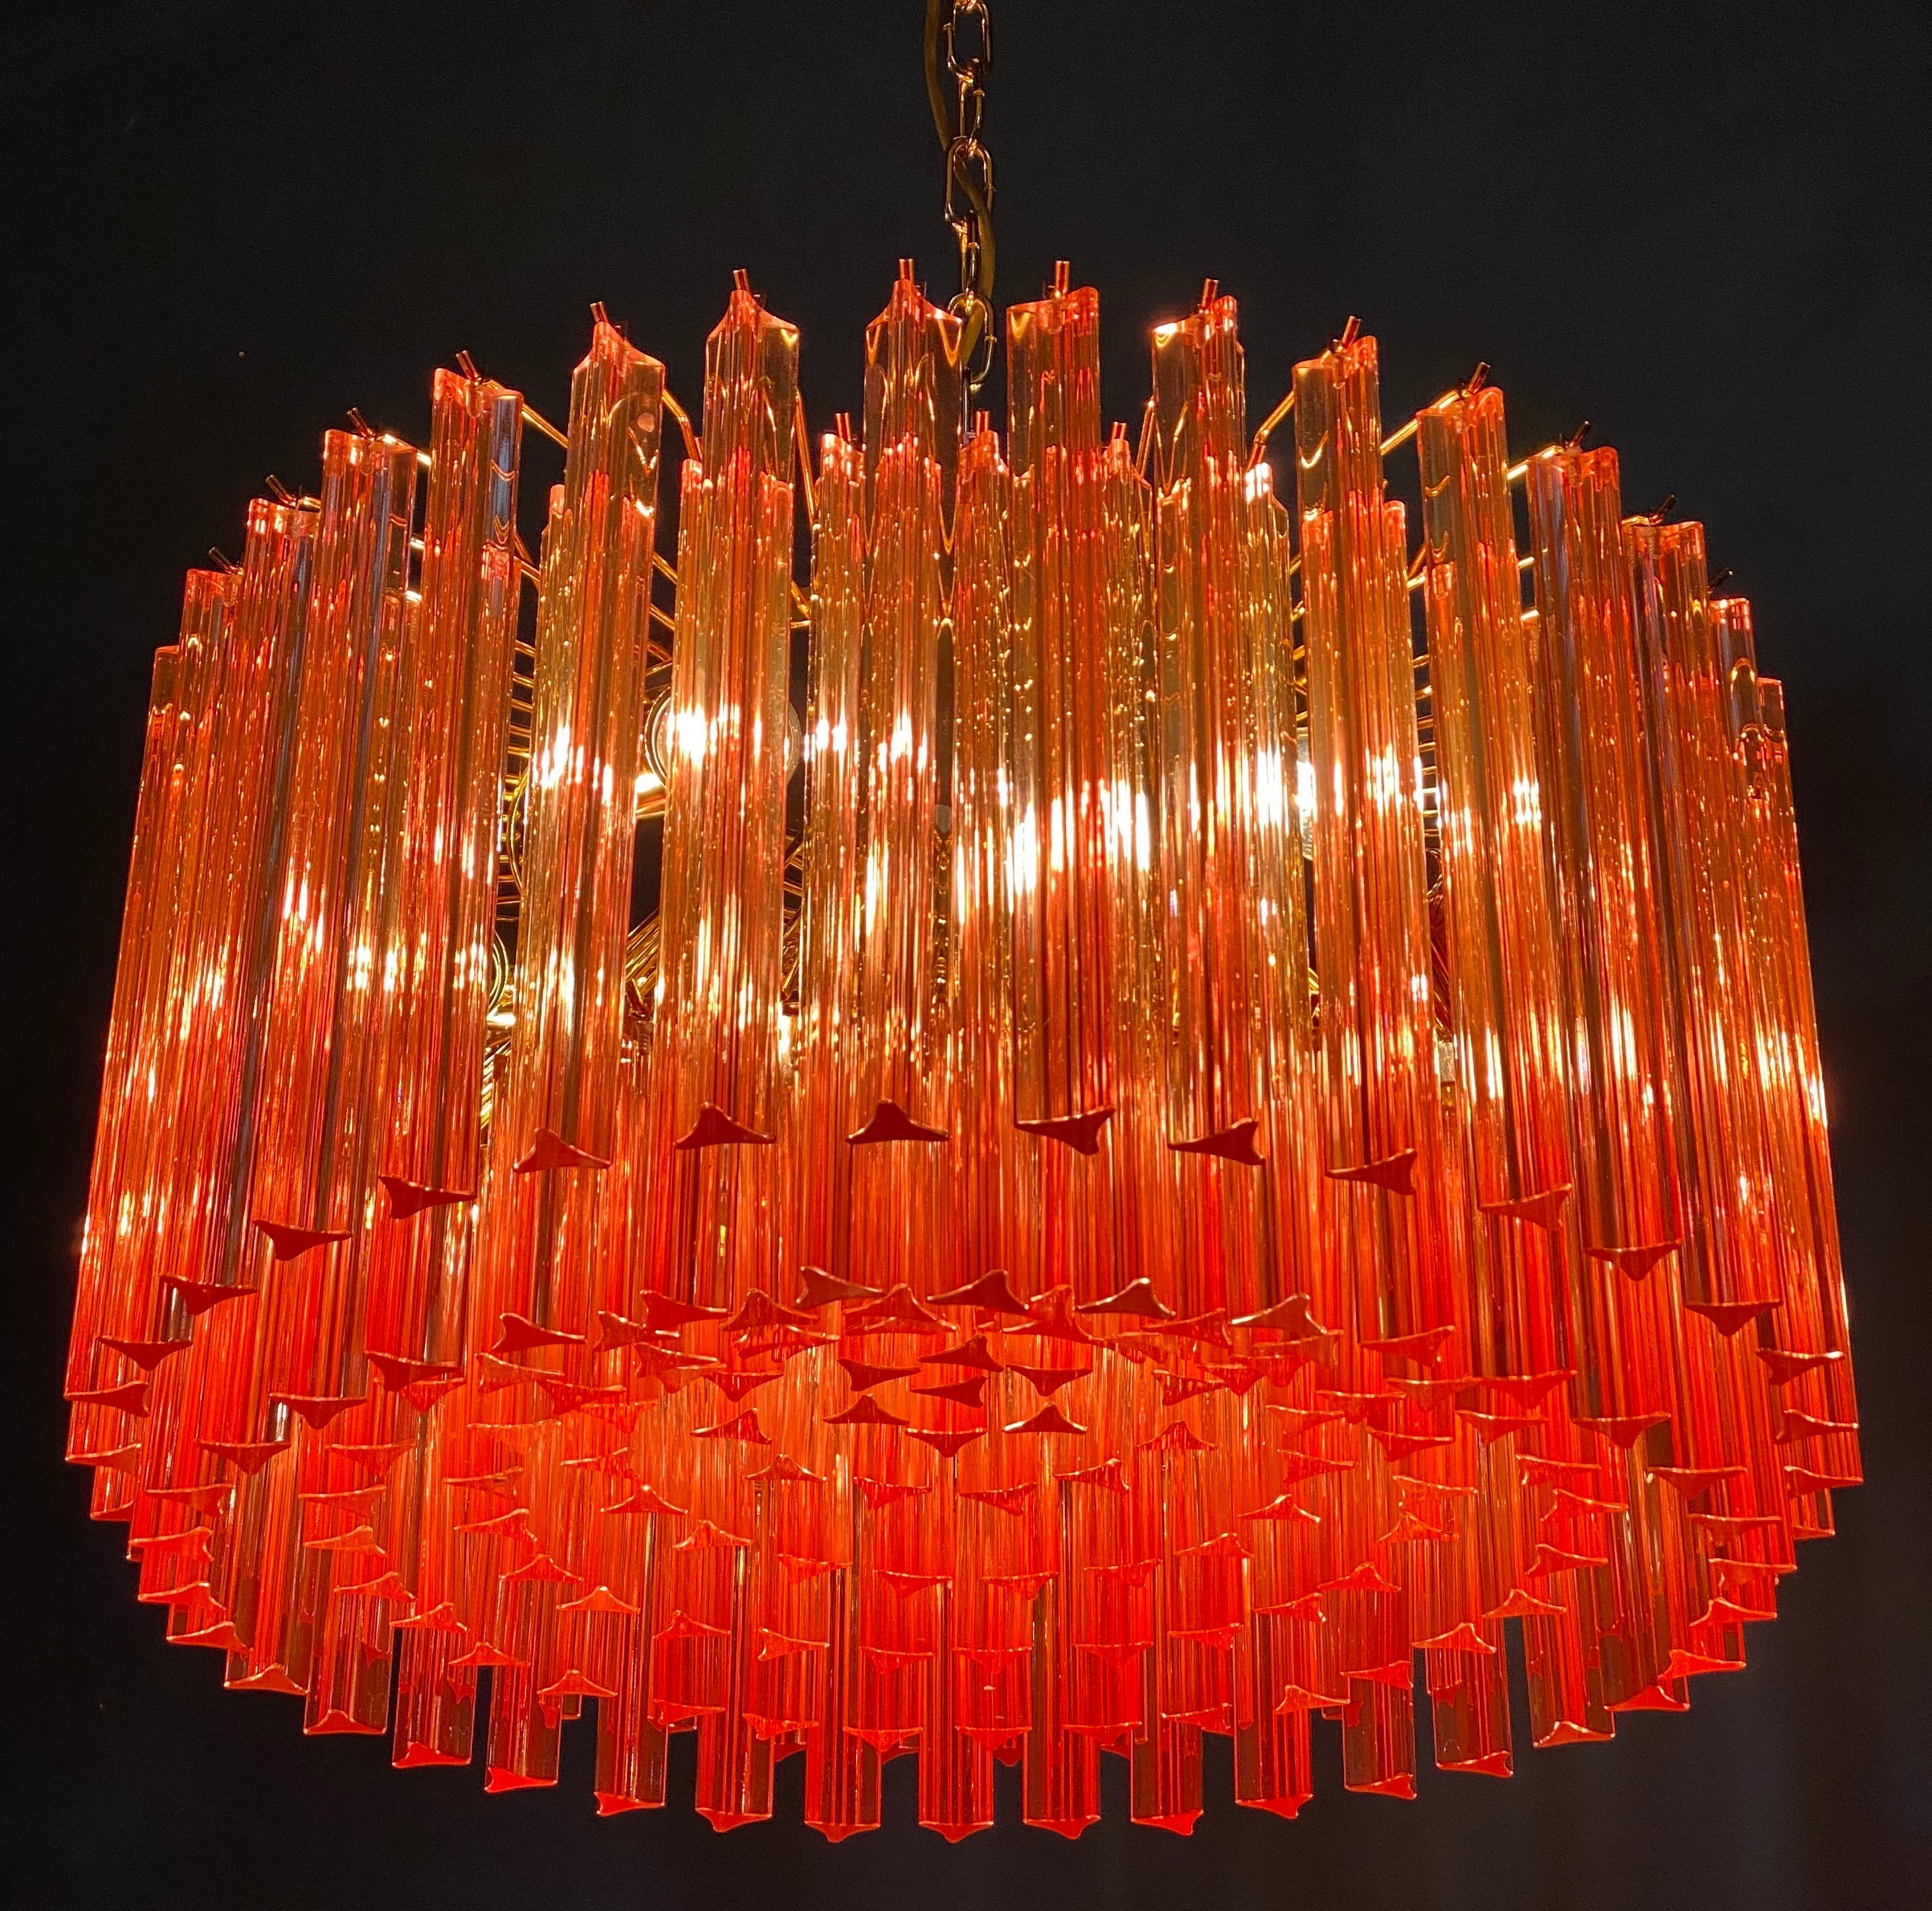 Fabulous Murano glass chandelier with stunning coral color triedri on brass frame.
Available a pair and a pair of sconces .

Dimensions: 43.30 inches (110 cm) height with chain; 13 inches (33 cm) height without chain; 23.5 inches (60 cm)